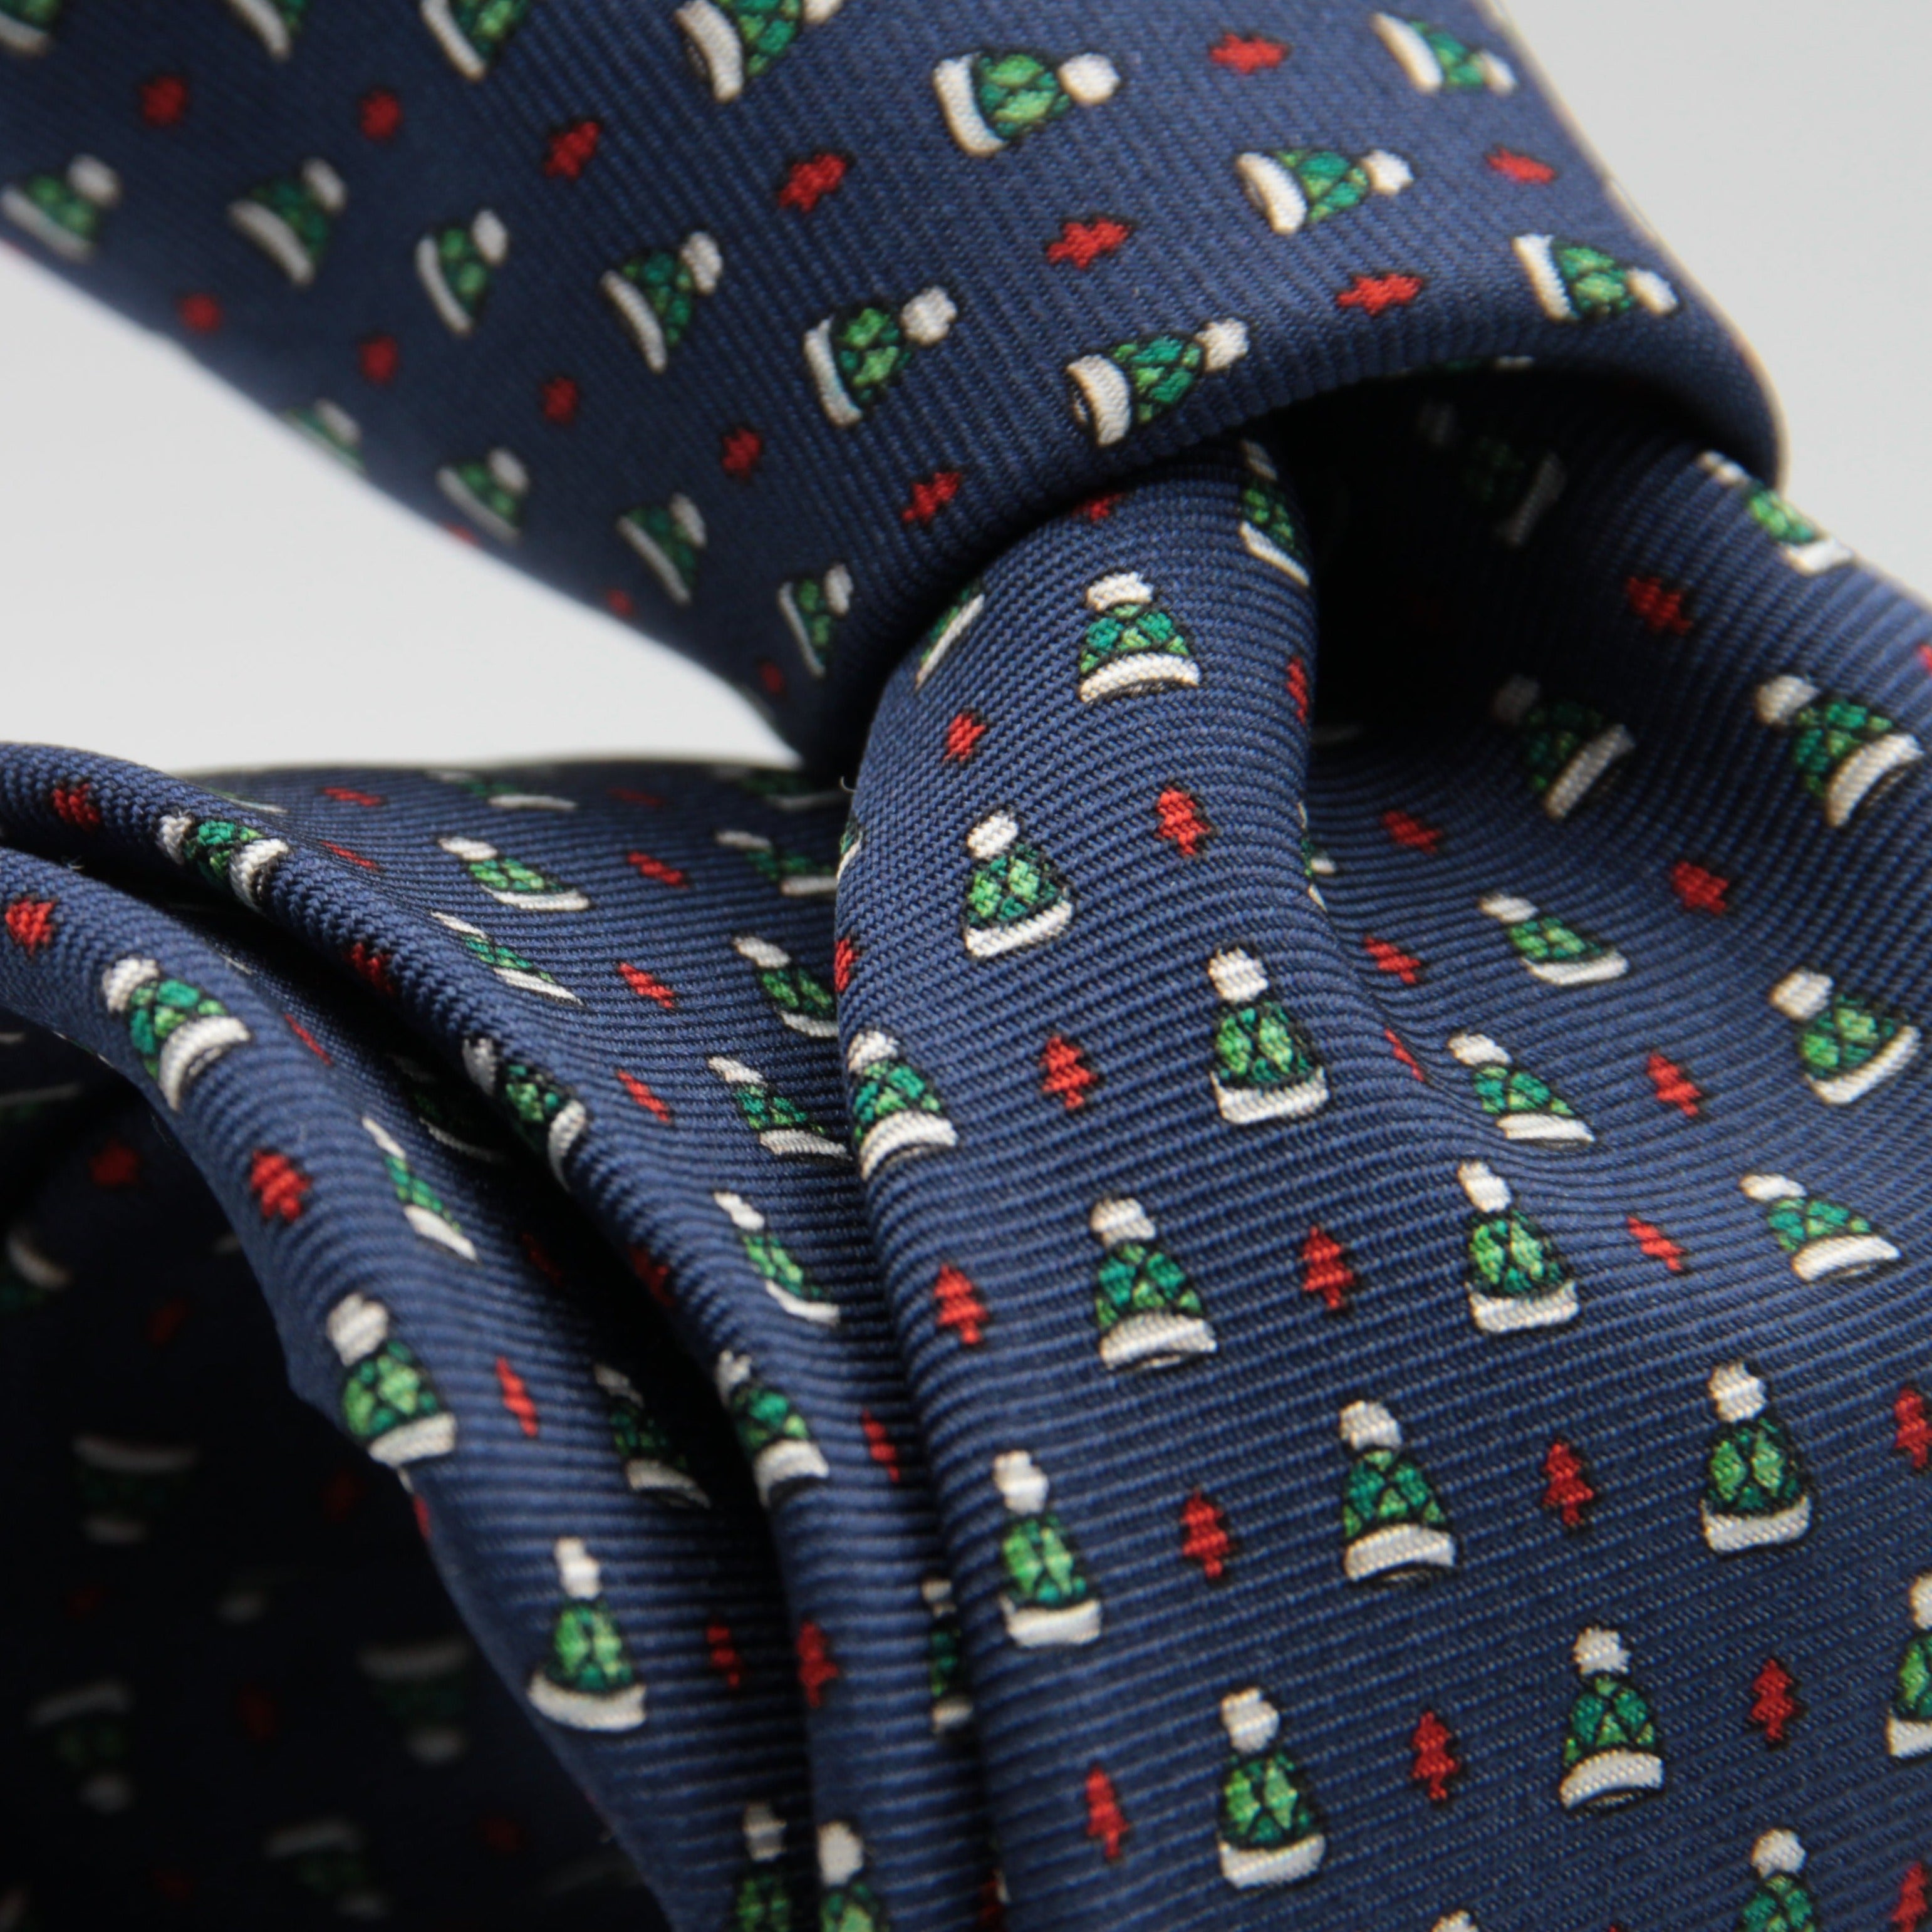 Holliday & Brown for Cruciani & Bella 100% printed Silk Self tipped Blue with green caps tie Handmade in Italy 8 cm x 150 cm #1529